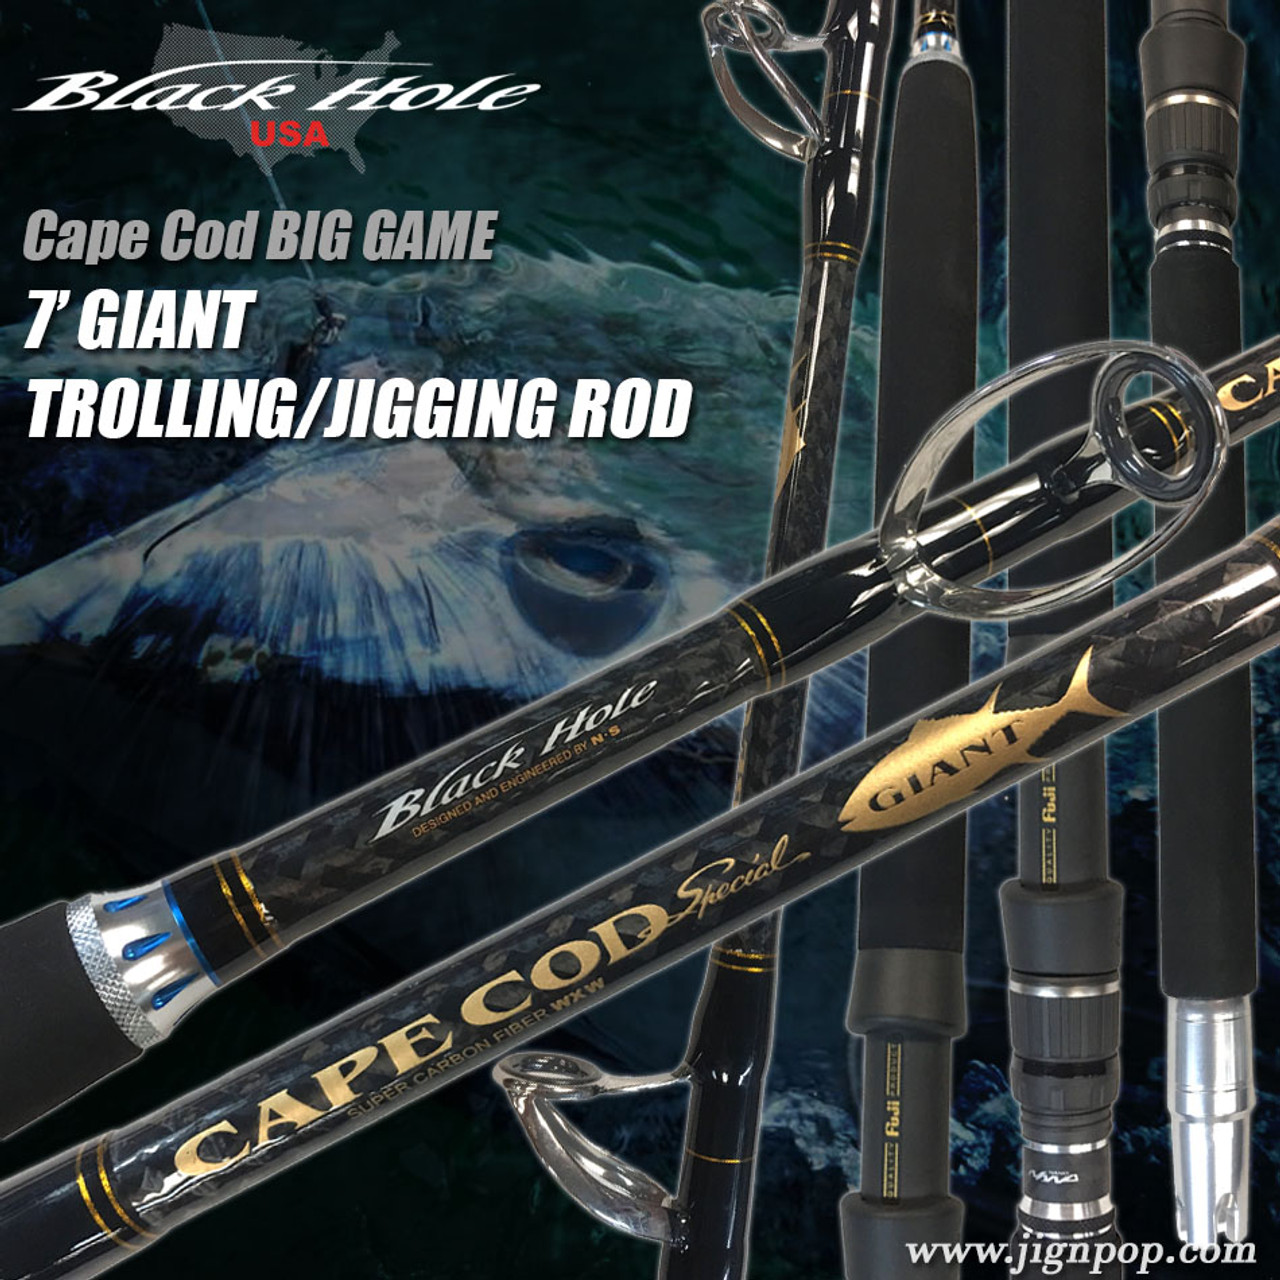 Black Hole 7' GIANT Trolling/Big Game Stand-up Jigging Rod, Black Hole,  Black Hole USA, Giant Rod, Trolling